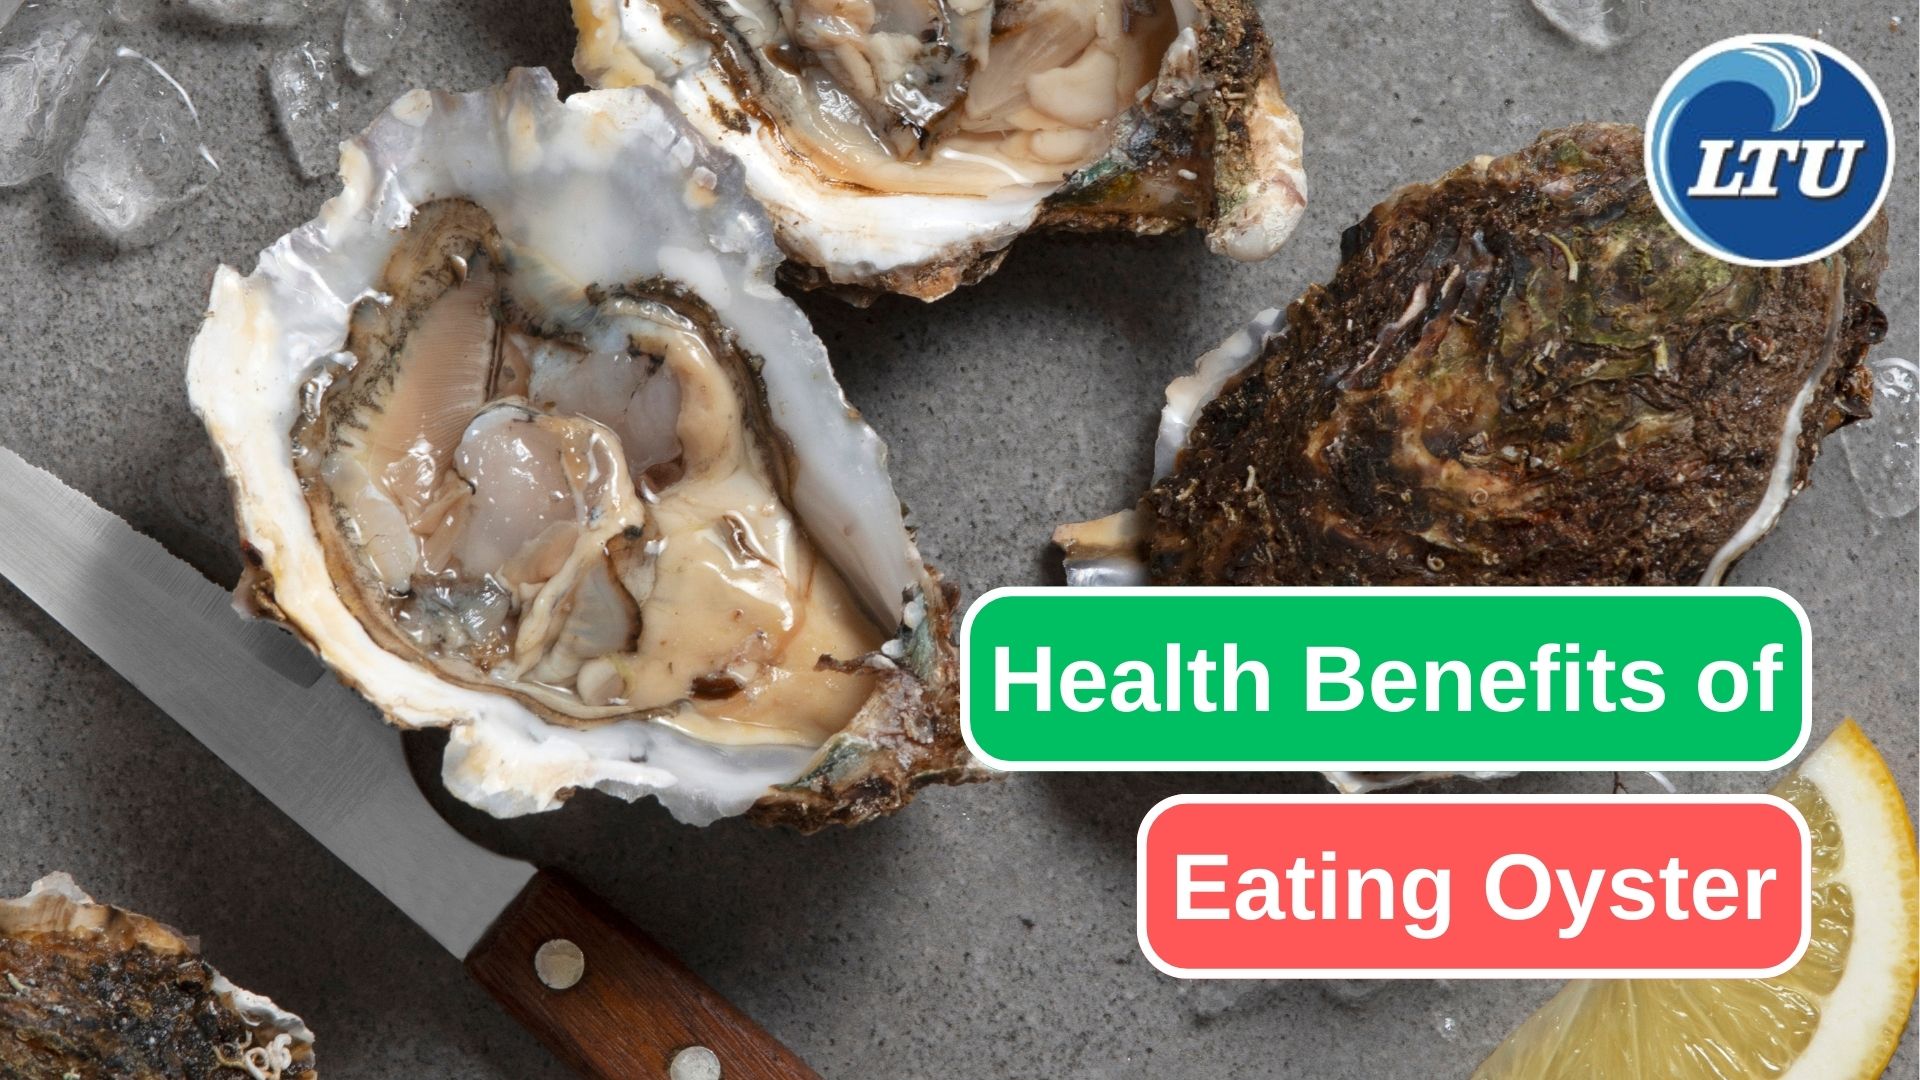 10 Reasons Why Eating Oyster Is Good for Your Health